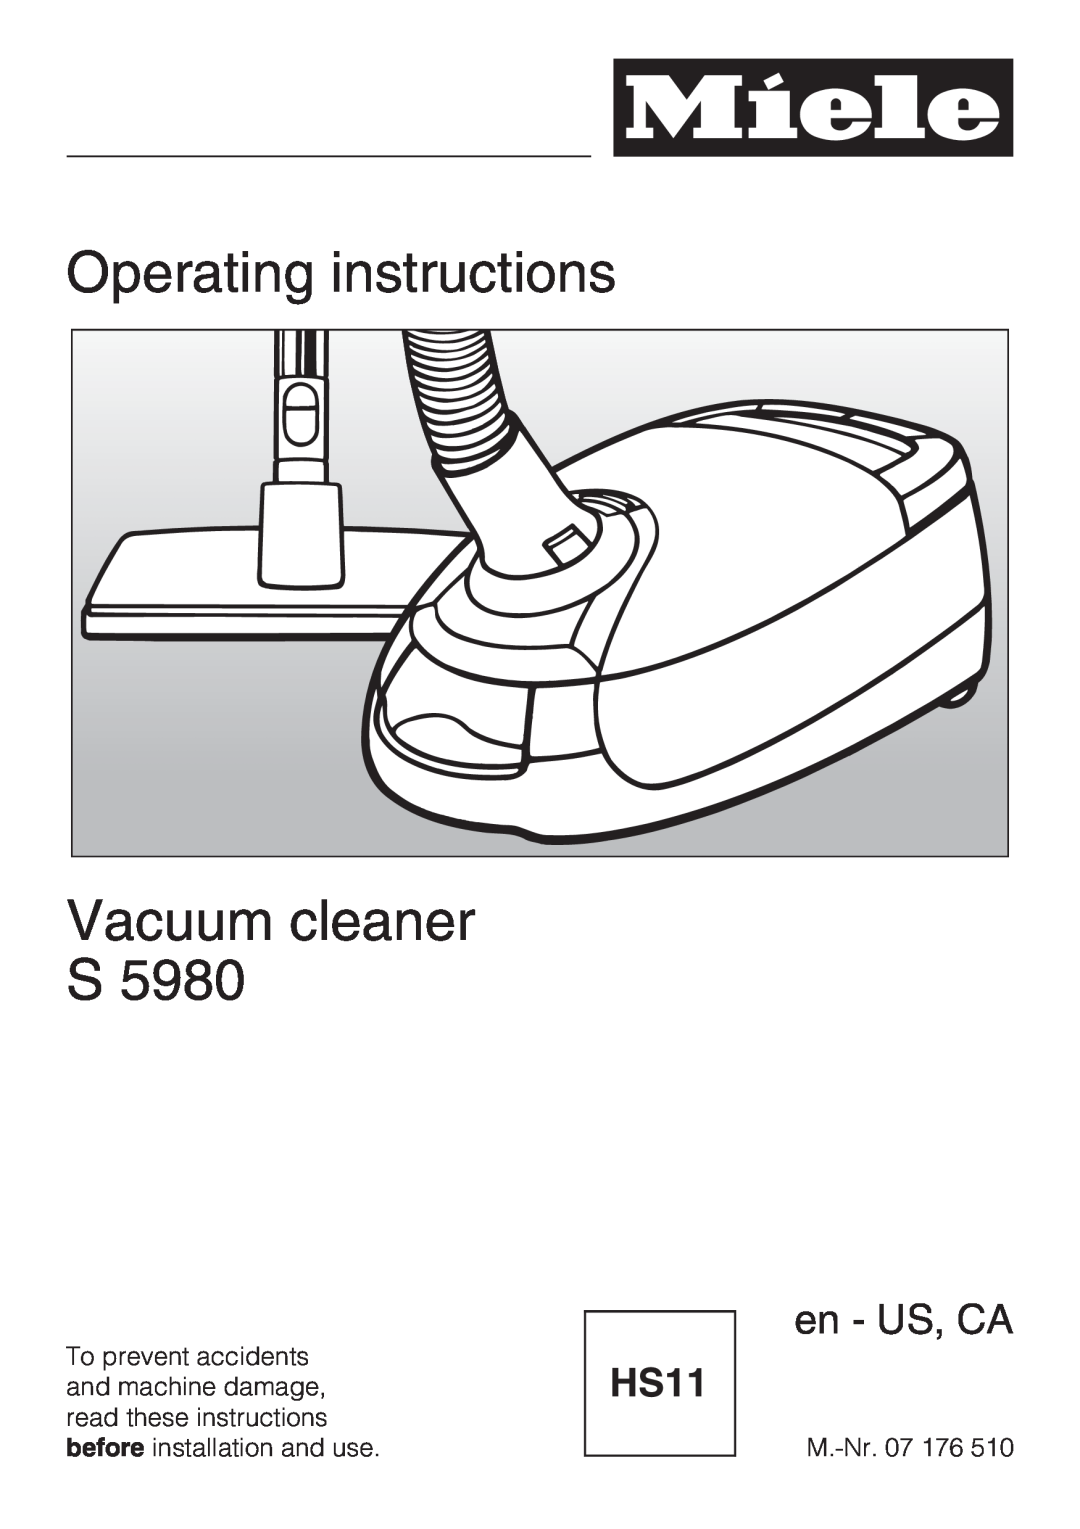 Miele S 5980 operating instructions Operating instructions Vacuum cleaner S, en - US, CA 